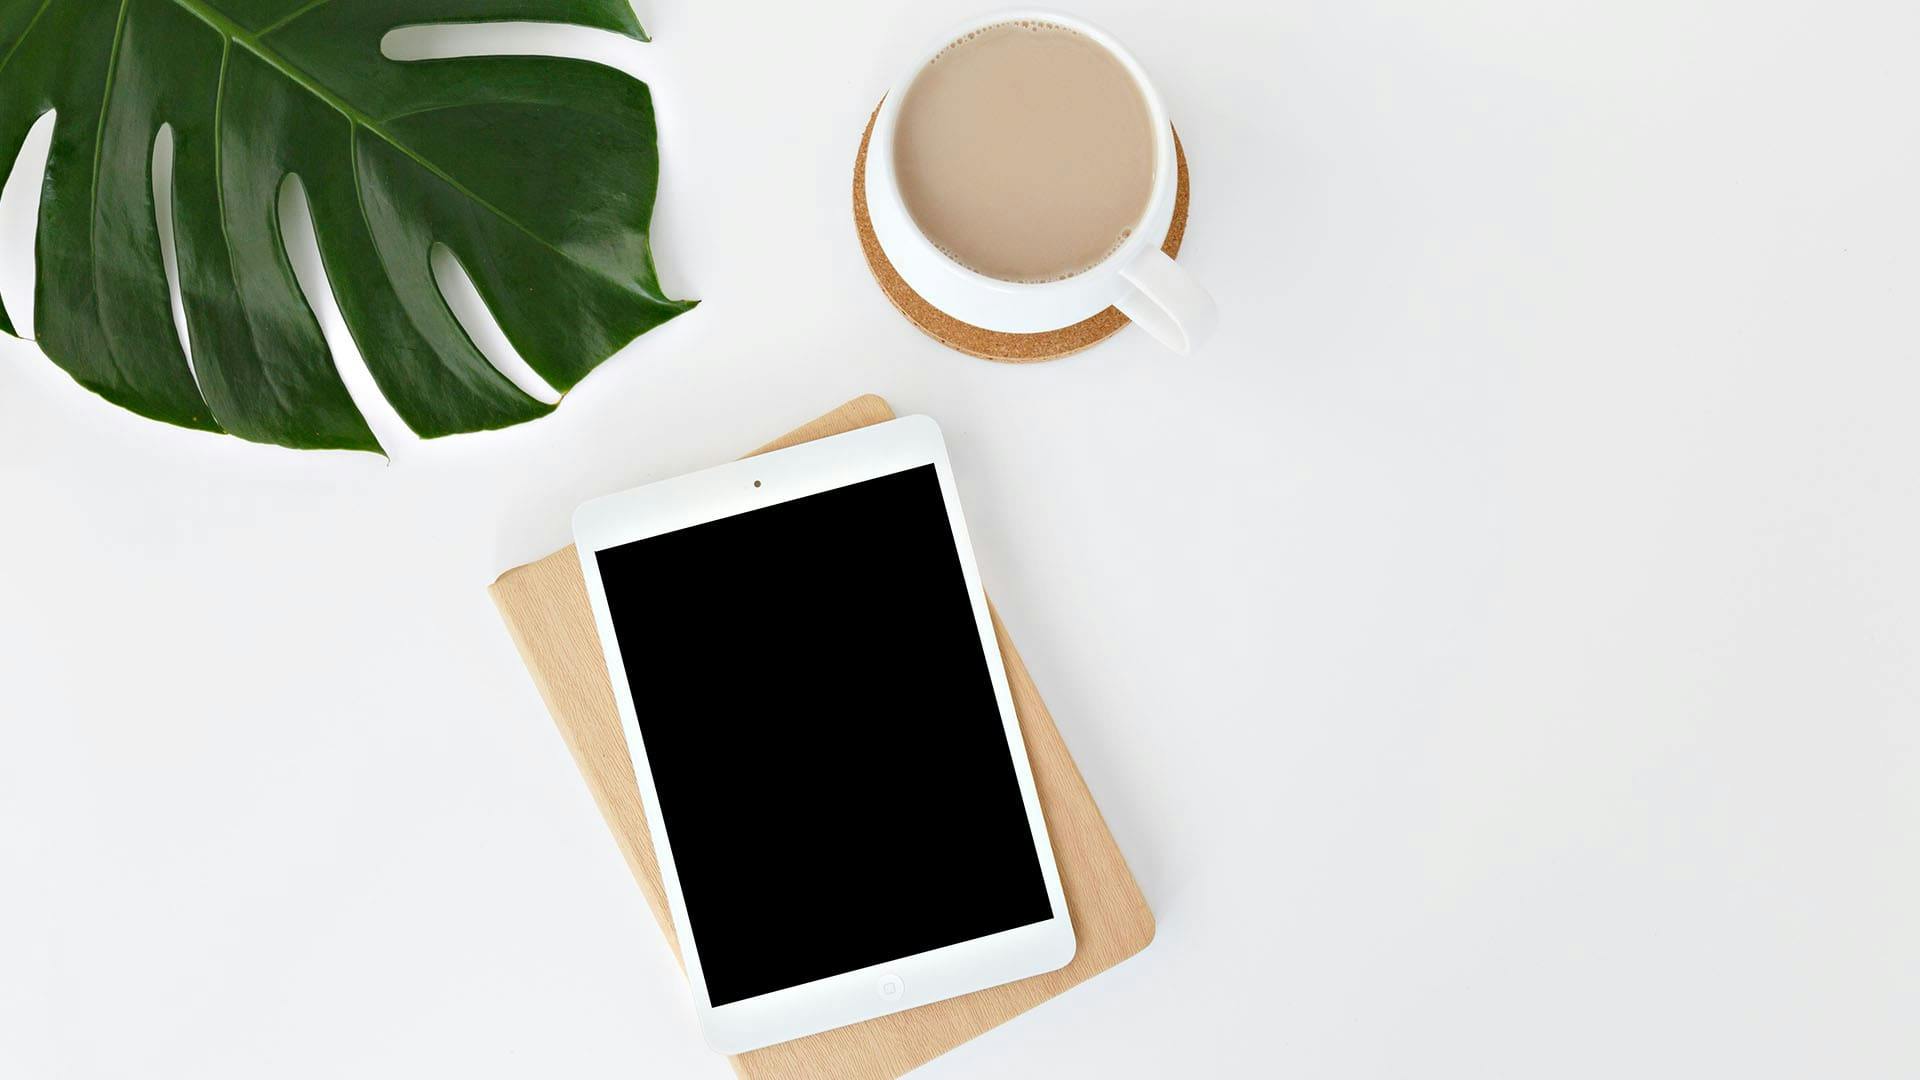 minimalist table with a white iPad on white surface, a cup of coffee and a leaf.